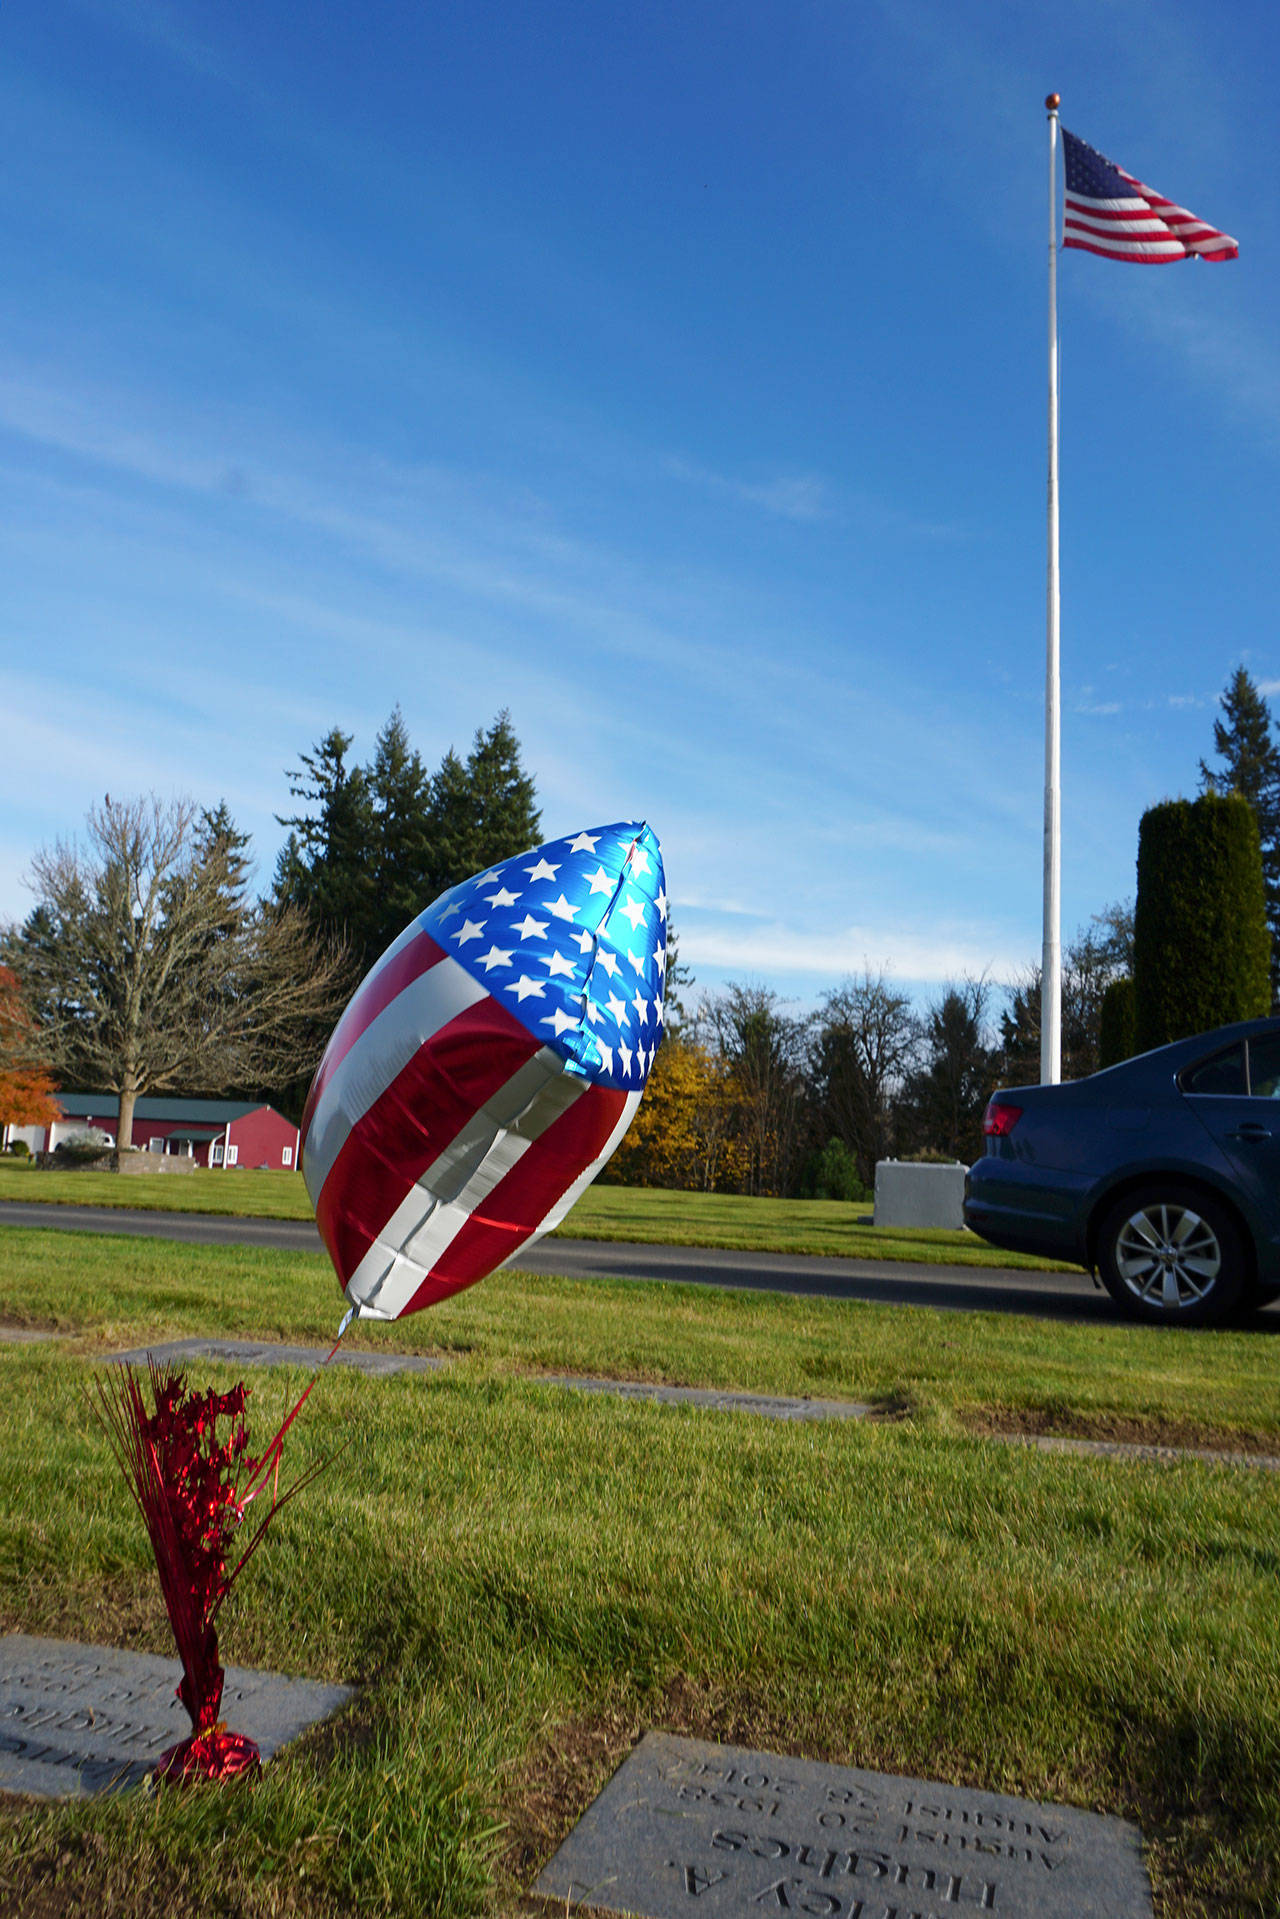 Cemeteries containing the remains of honored veterans — including Sunset Lane Memorial Park in Port Orchard — were visited by somber family members on this quiet Monday afternoon who left miniature flags and small stars-and-stripes-adorned balloons next to the plaques and monuments of their loved ones who served the nation at some point of their lives. (Bob Smith | Kitsap Daily News)